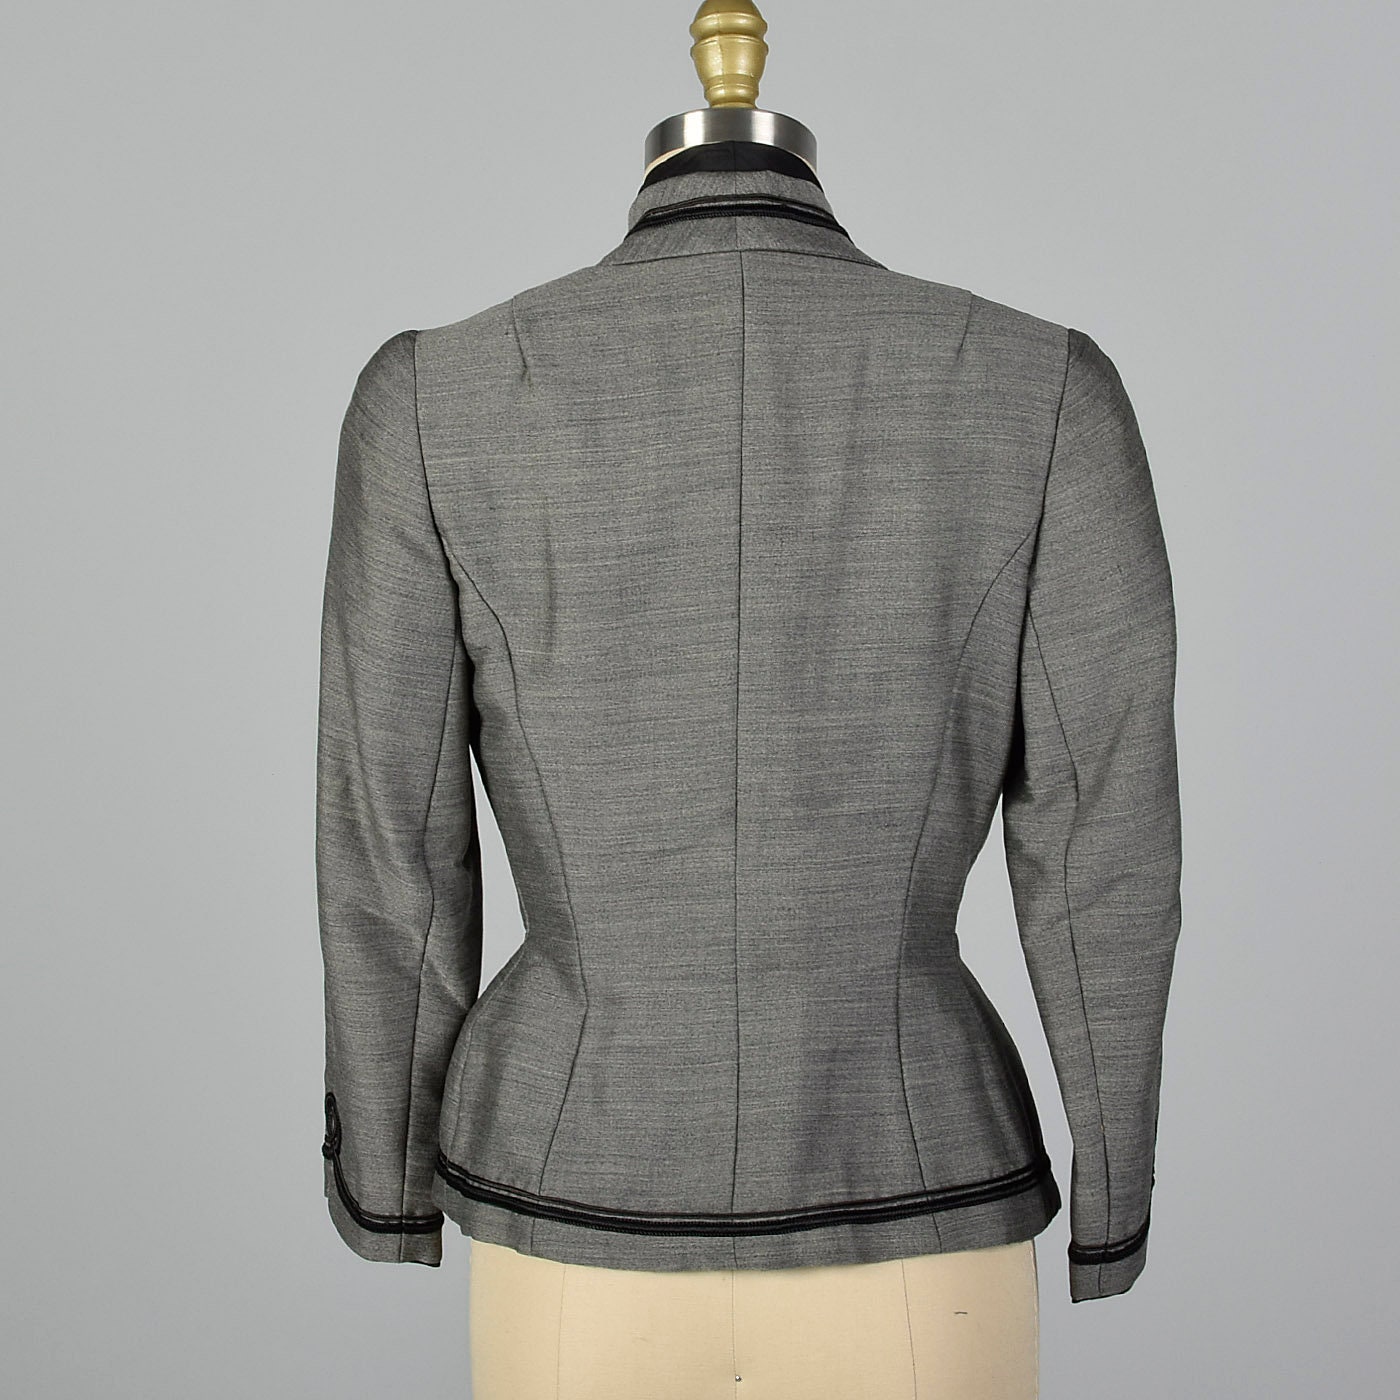 XS 1950s Bonwit Teller Gray Fitted Blazer Black Trim Fitted Jacket ...